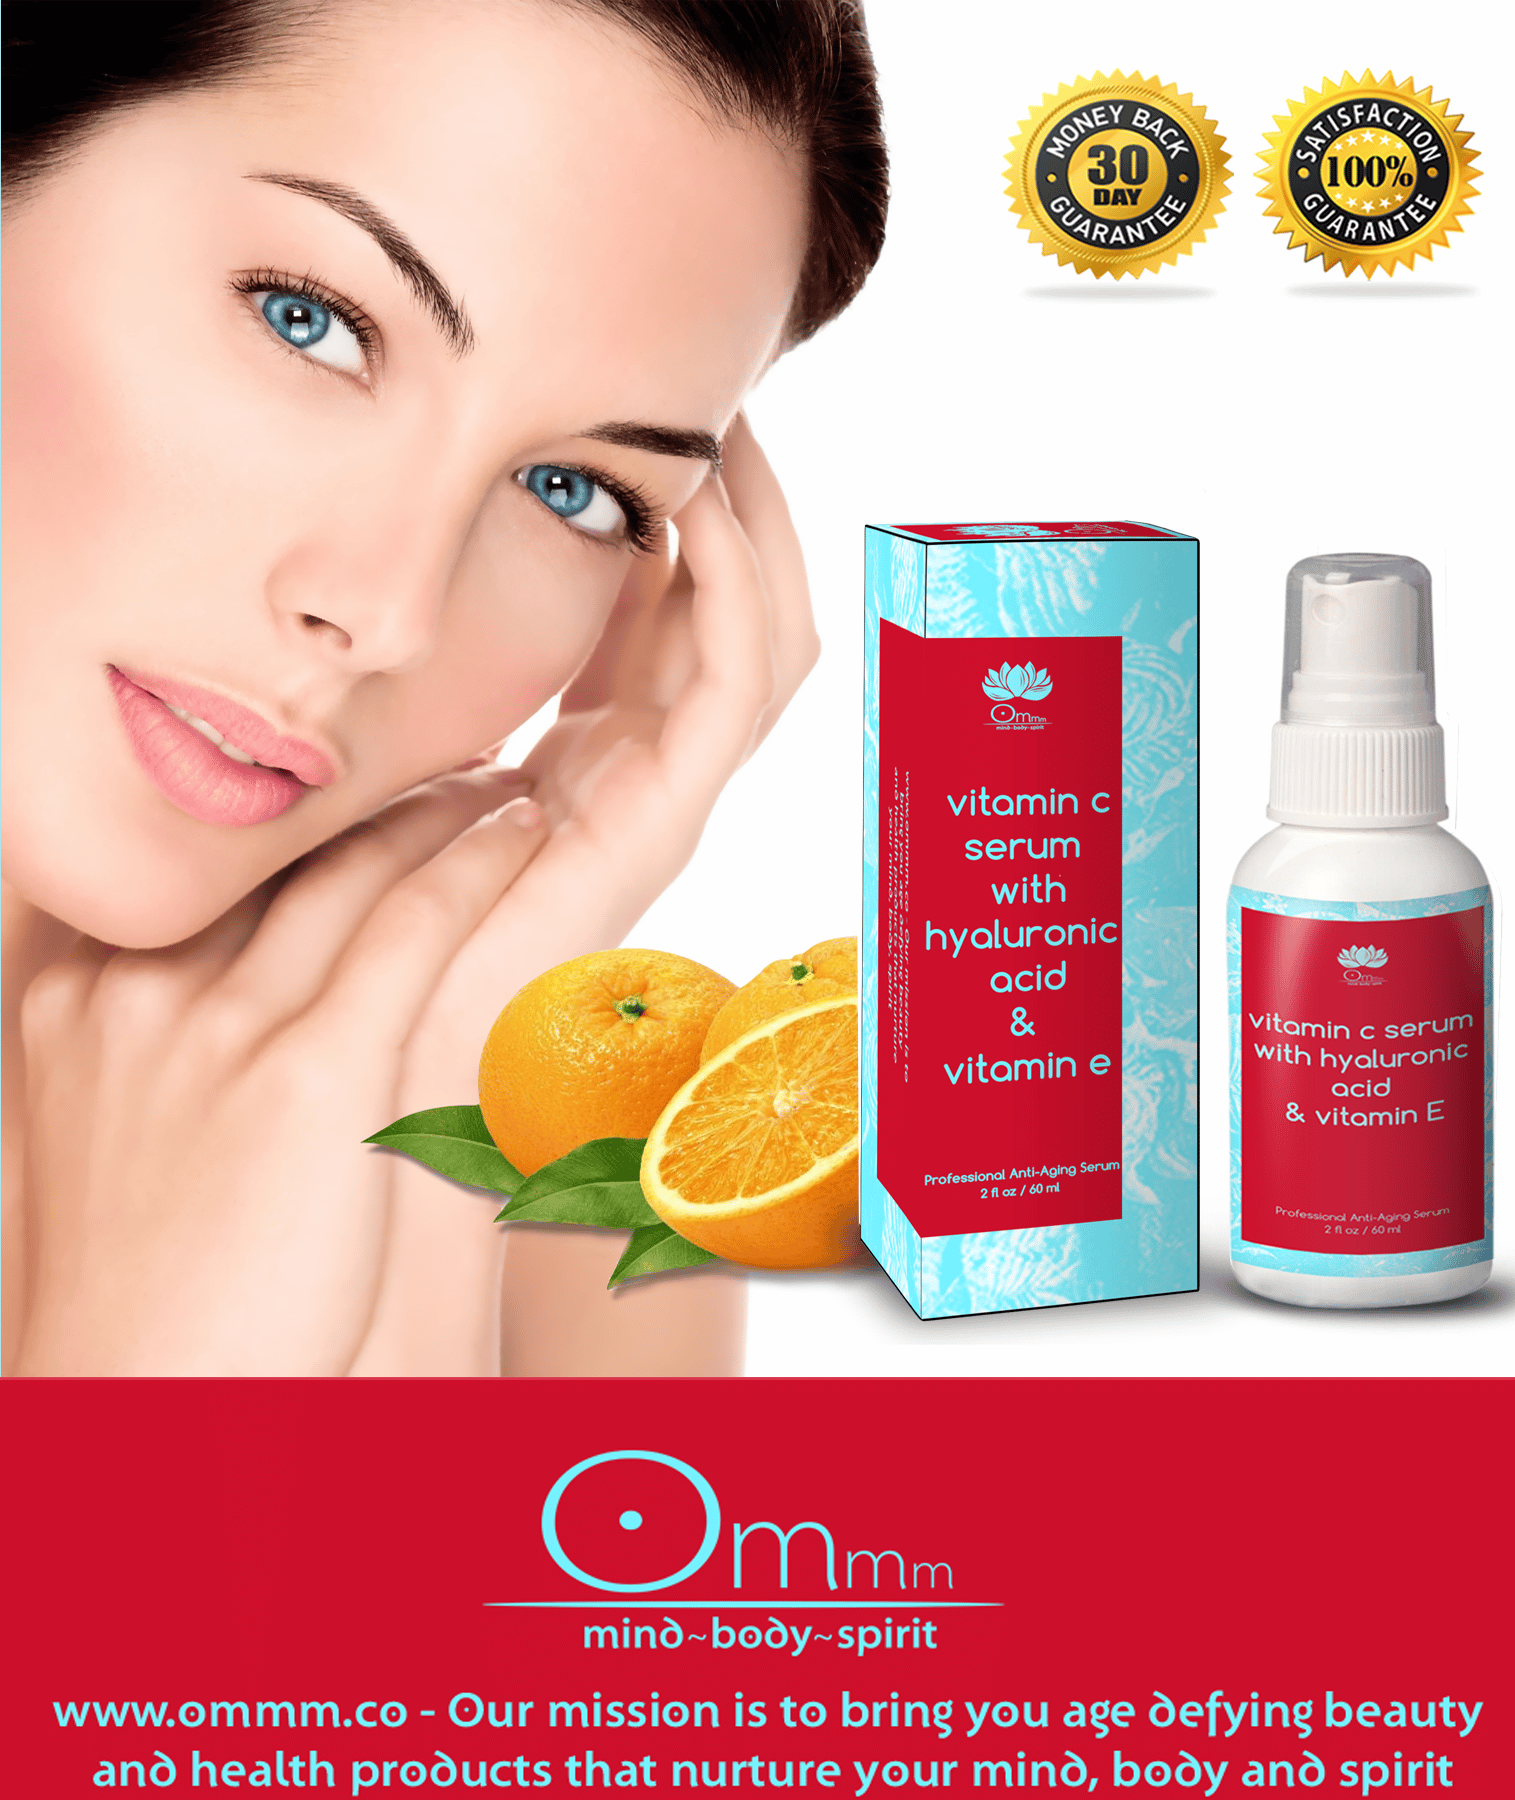 Why Every Women Should Use a High Quality Vitamin C Serum? Discover The ...